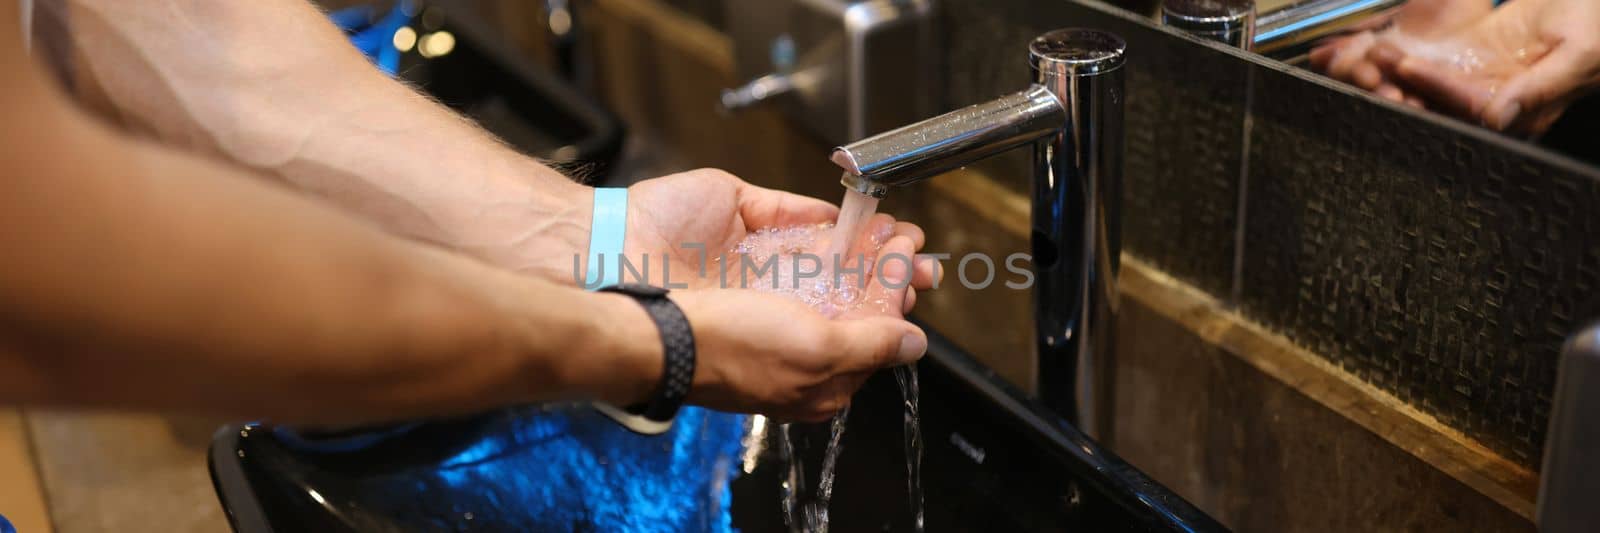 Man washes hands in the sink in bathroom at home checking temperature by touching running water with hand. Closeup on fingers under hot water from sink tap concept